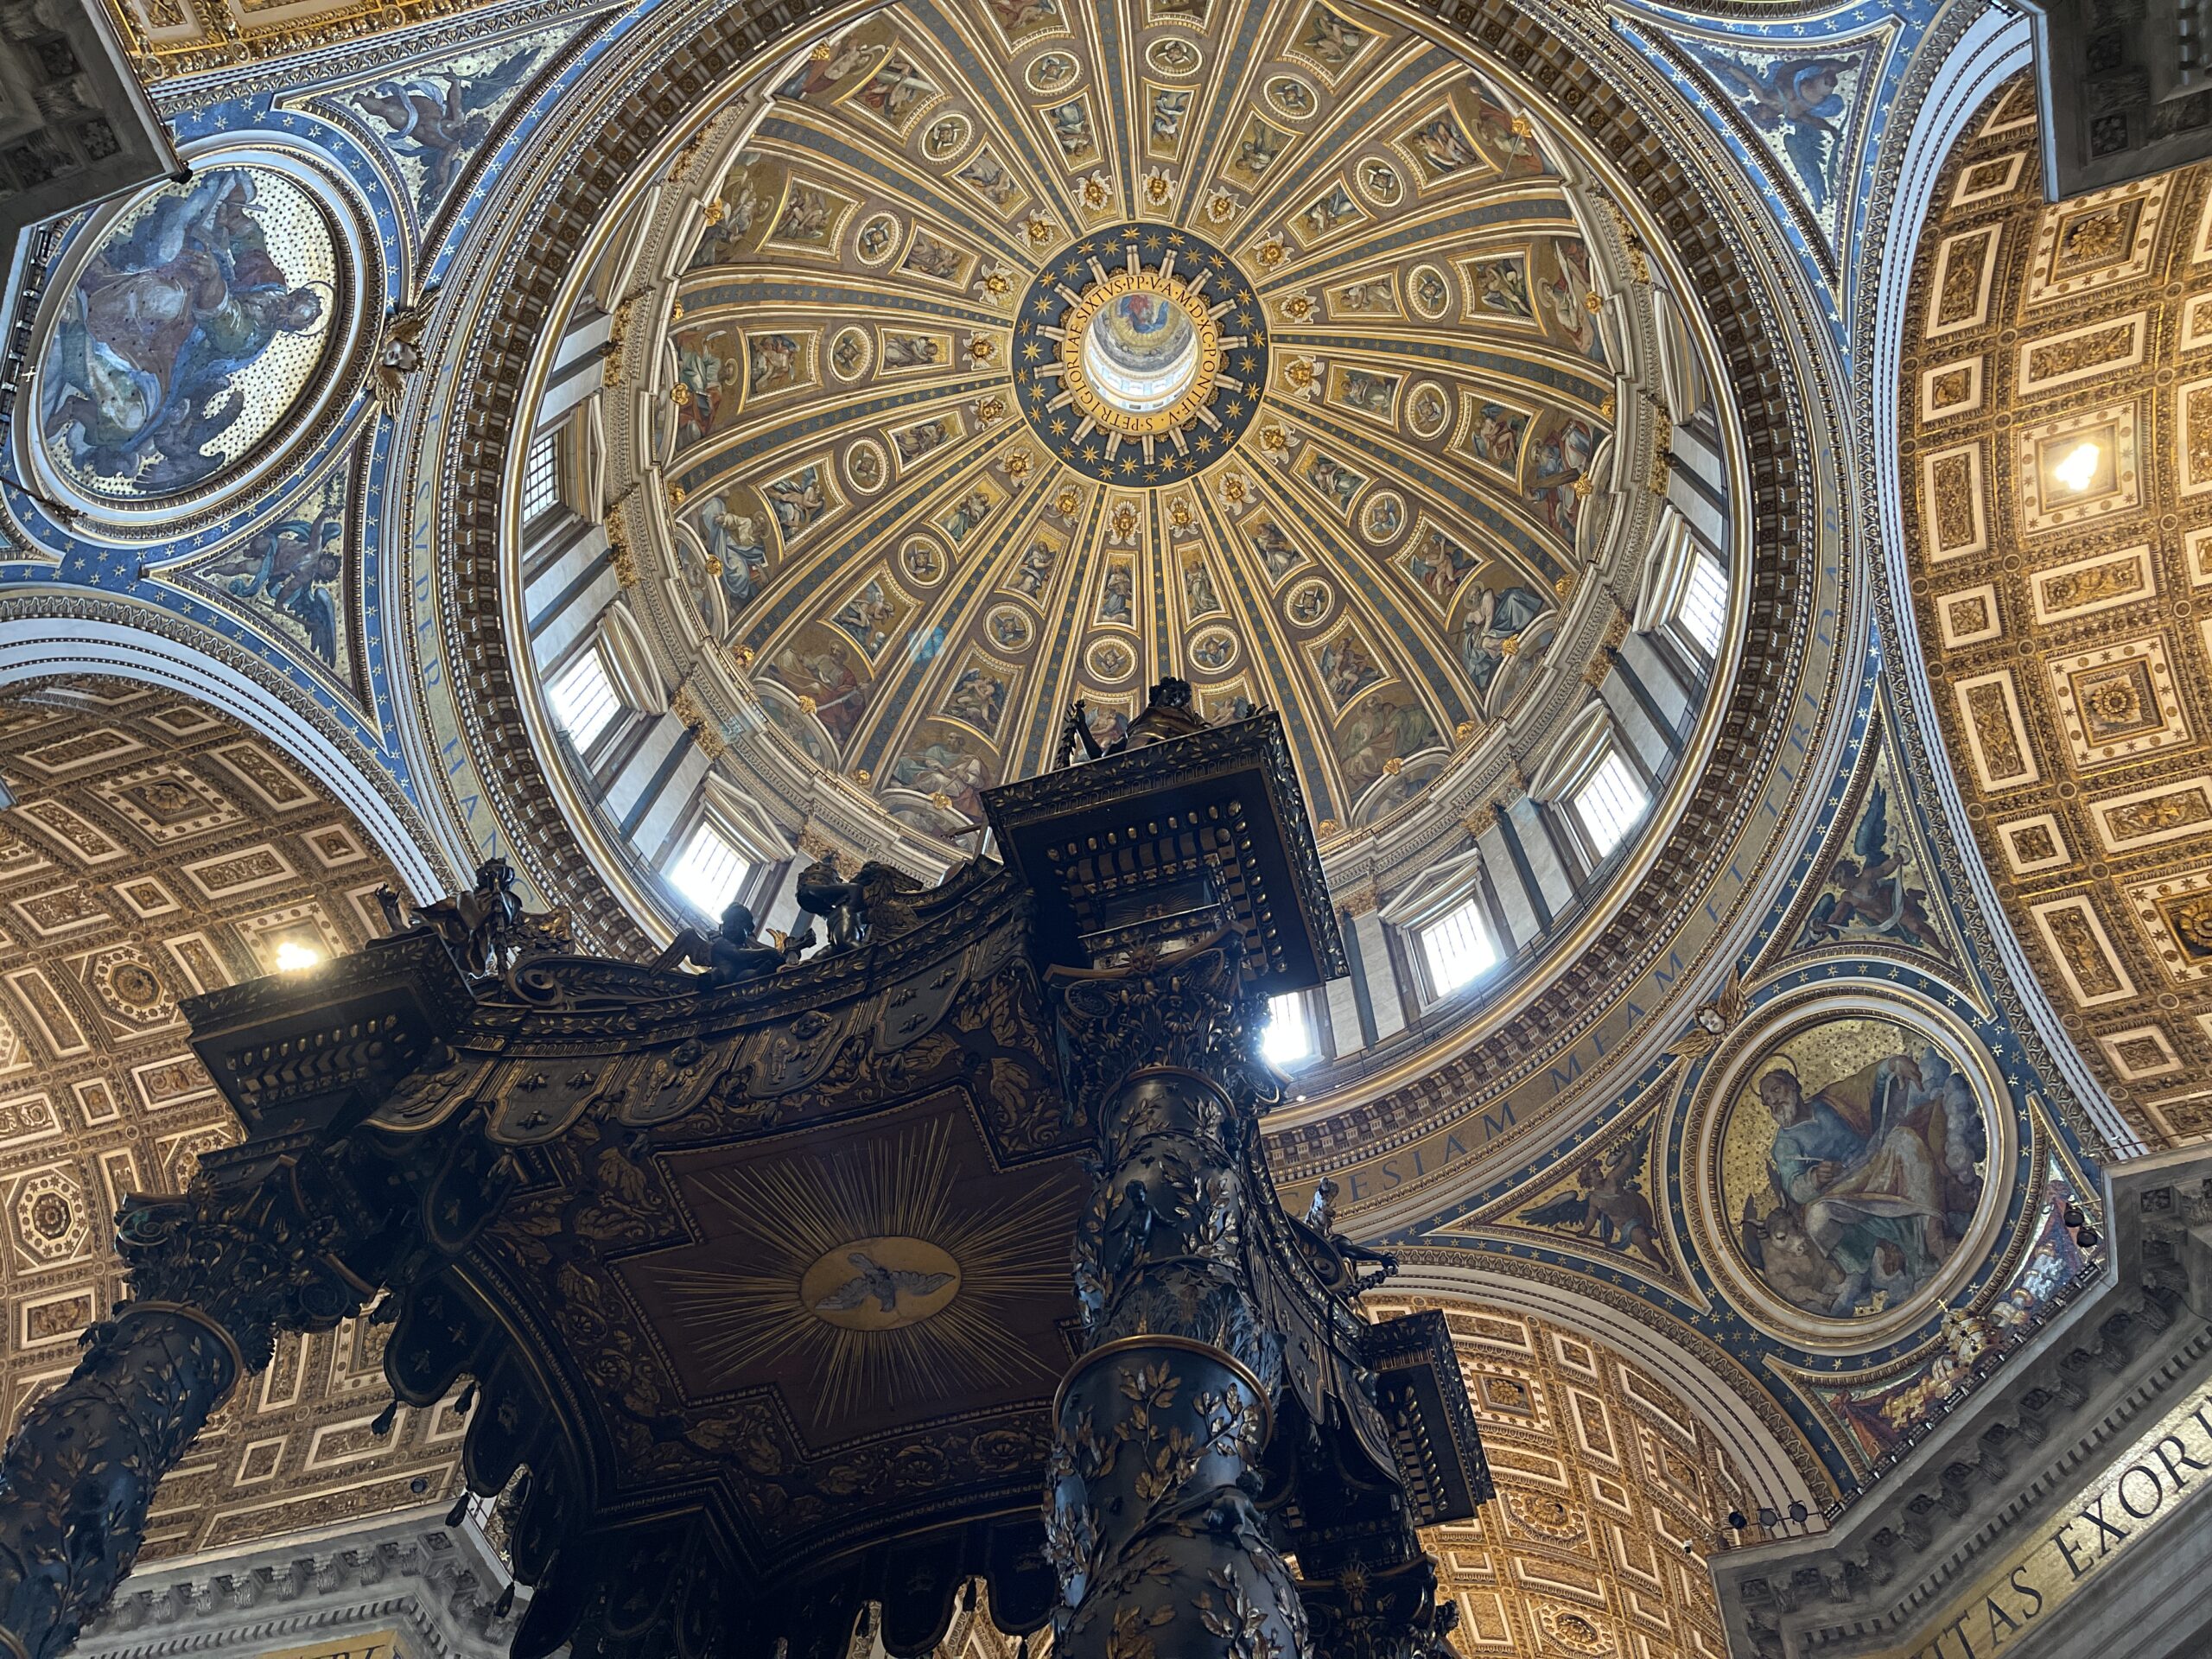 Baldacchino and Dome in St. Peter's Basilica, Vatican City